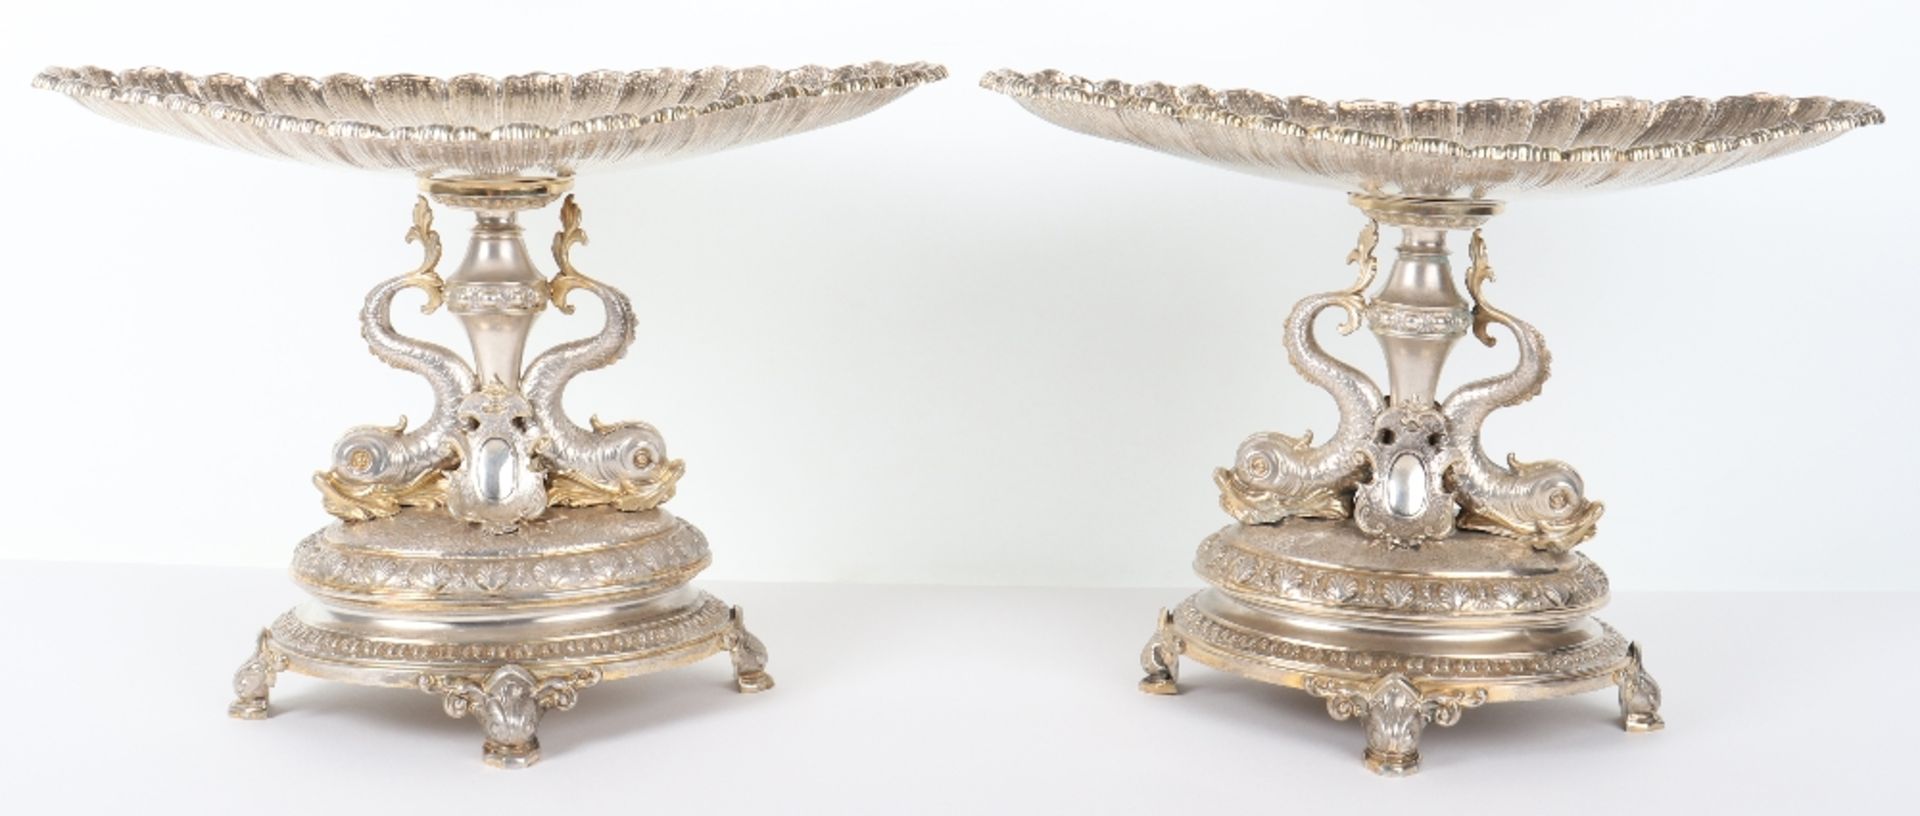 A pair of Continental silver gilt tazzas, German early 20th century